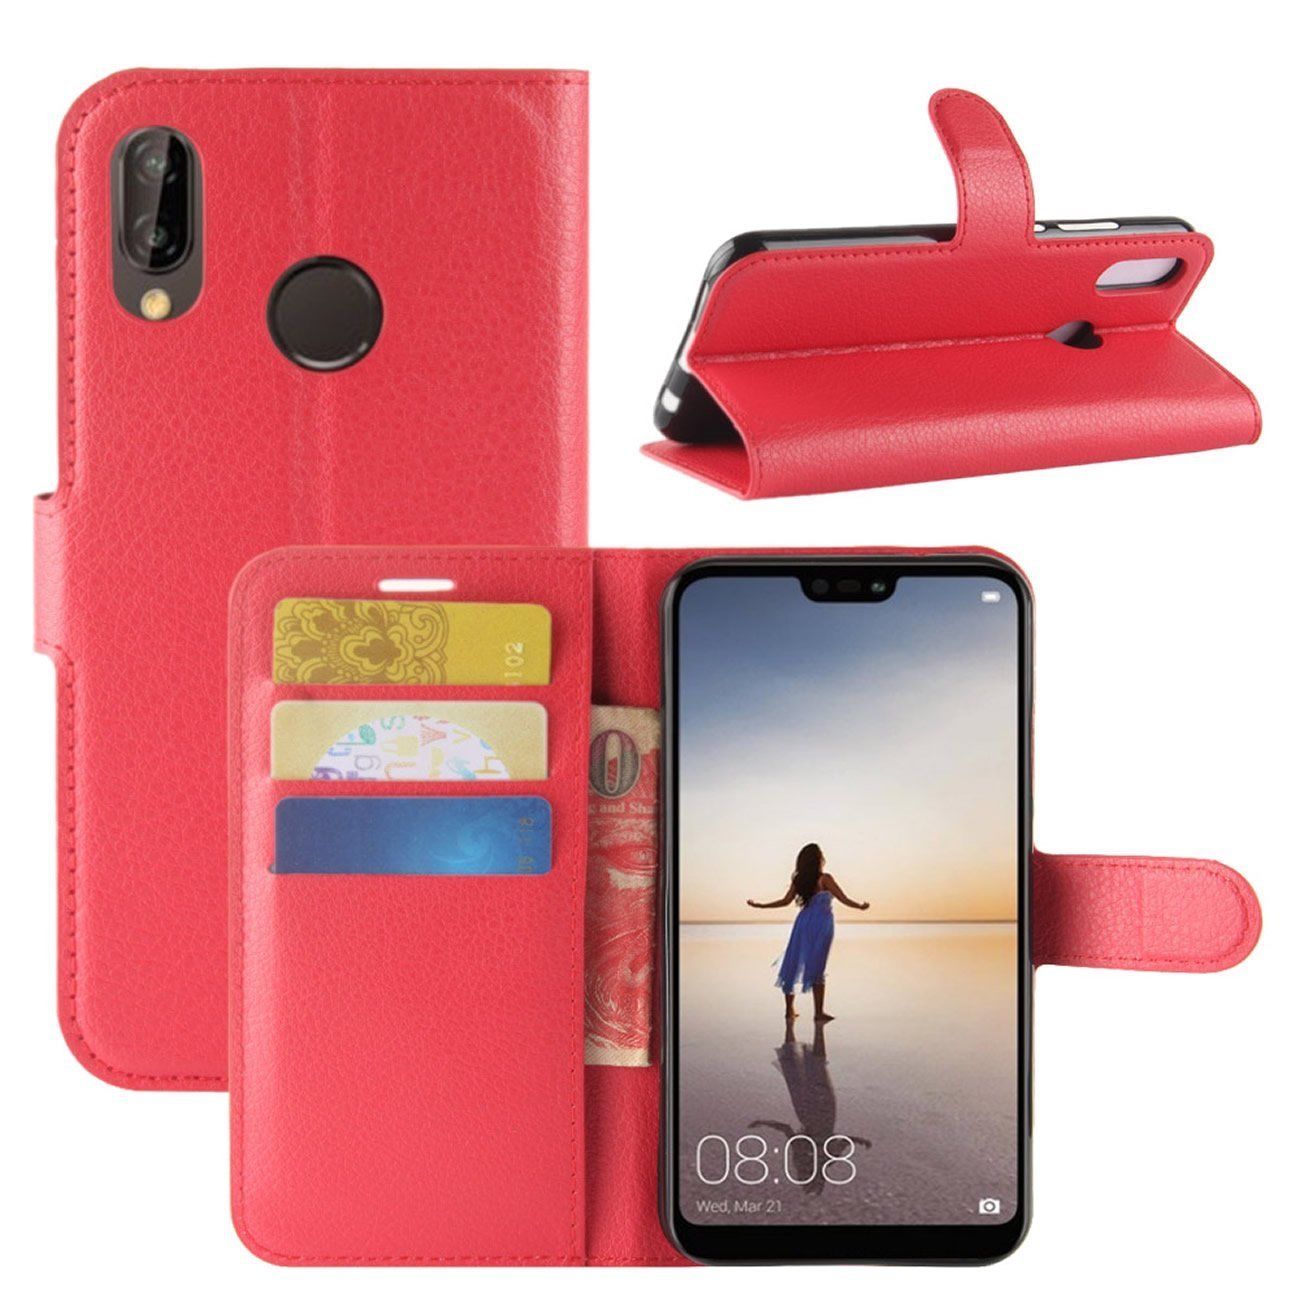 New Premium Leather Wallet Case TPU Cover For HUAWEI Nova 3e-Red